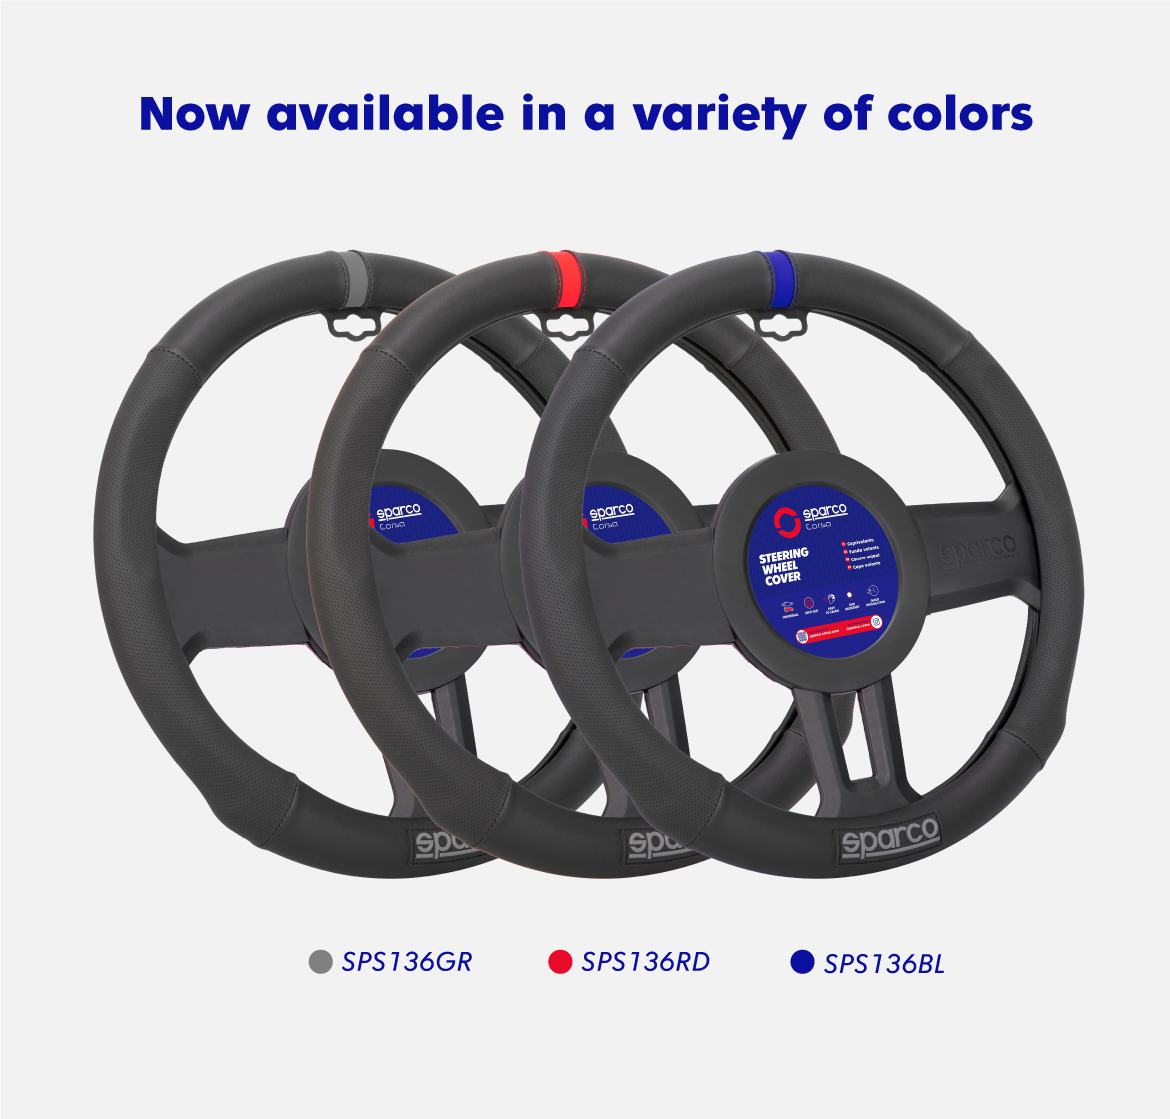 SPARCO Steering Wheel Cover Grey / Blue , PU *NEW* Tuning Design